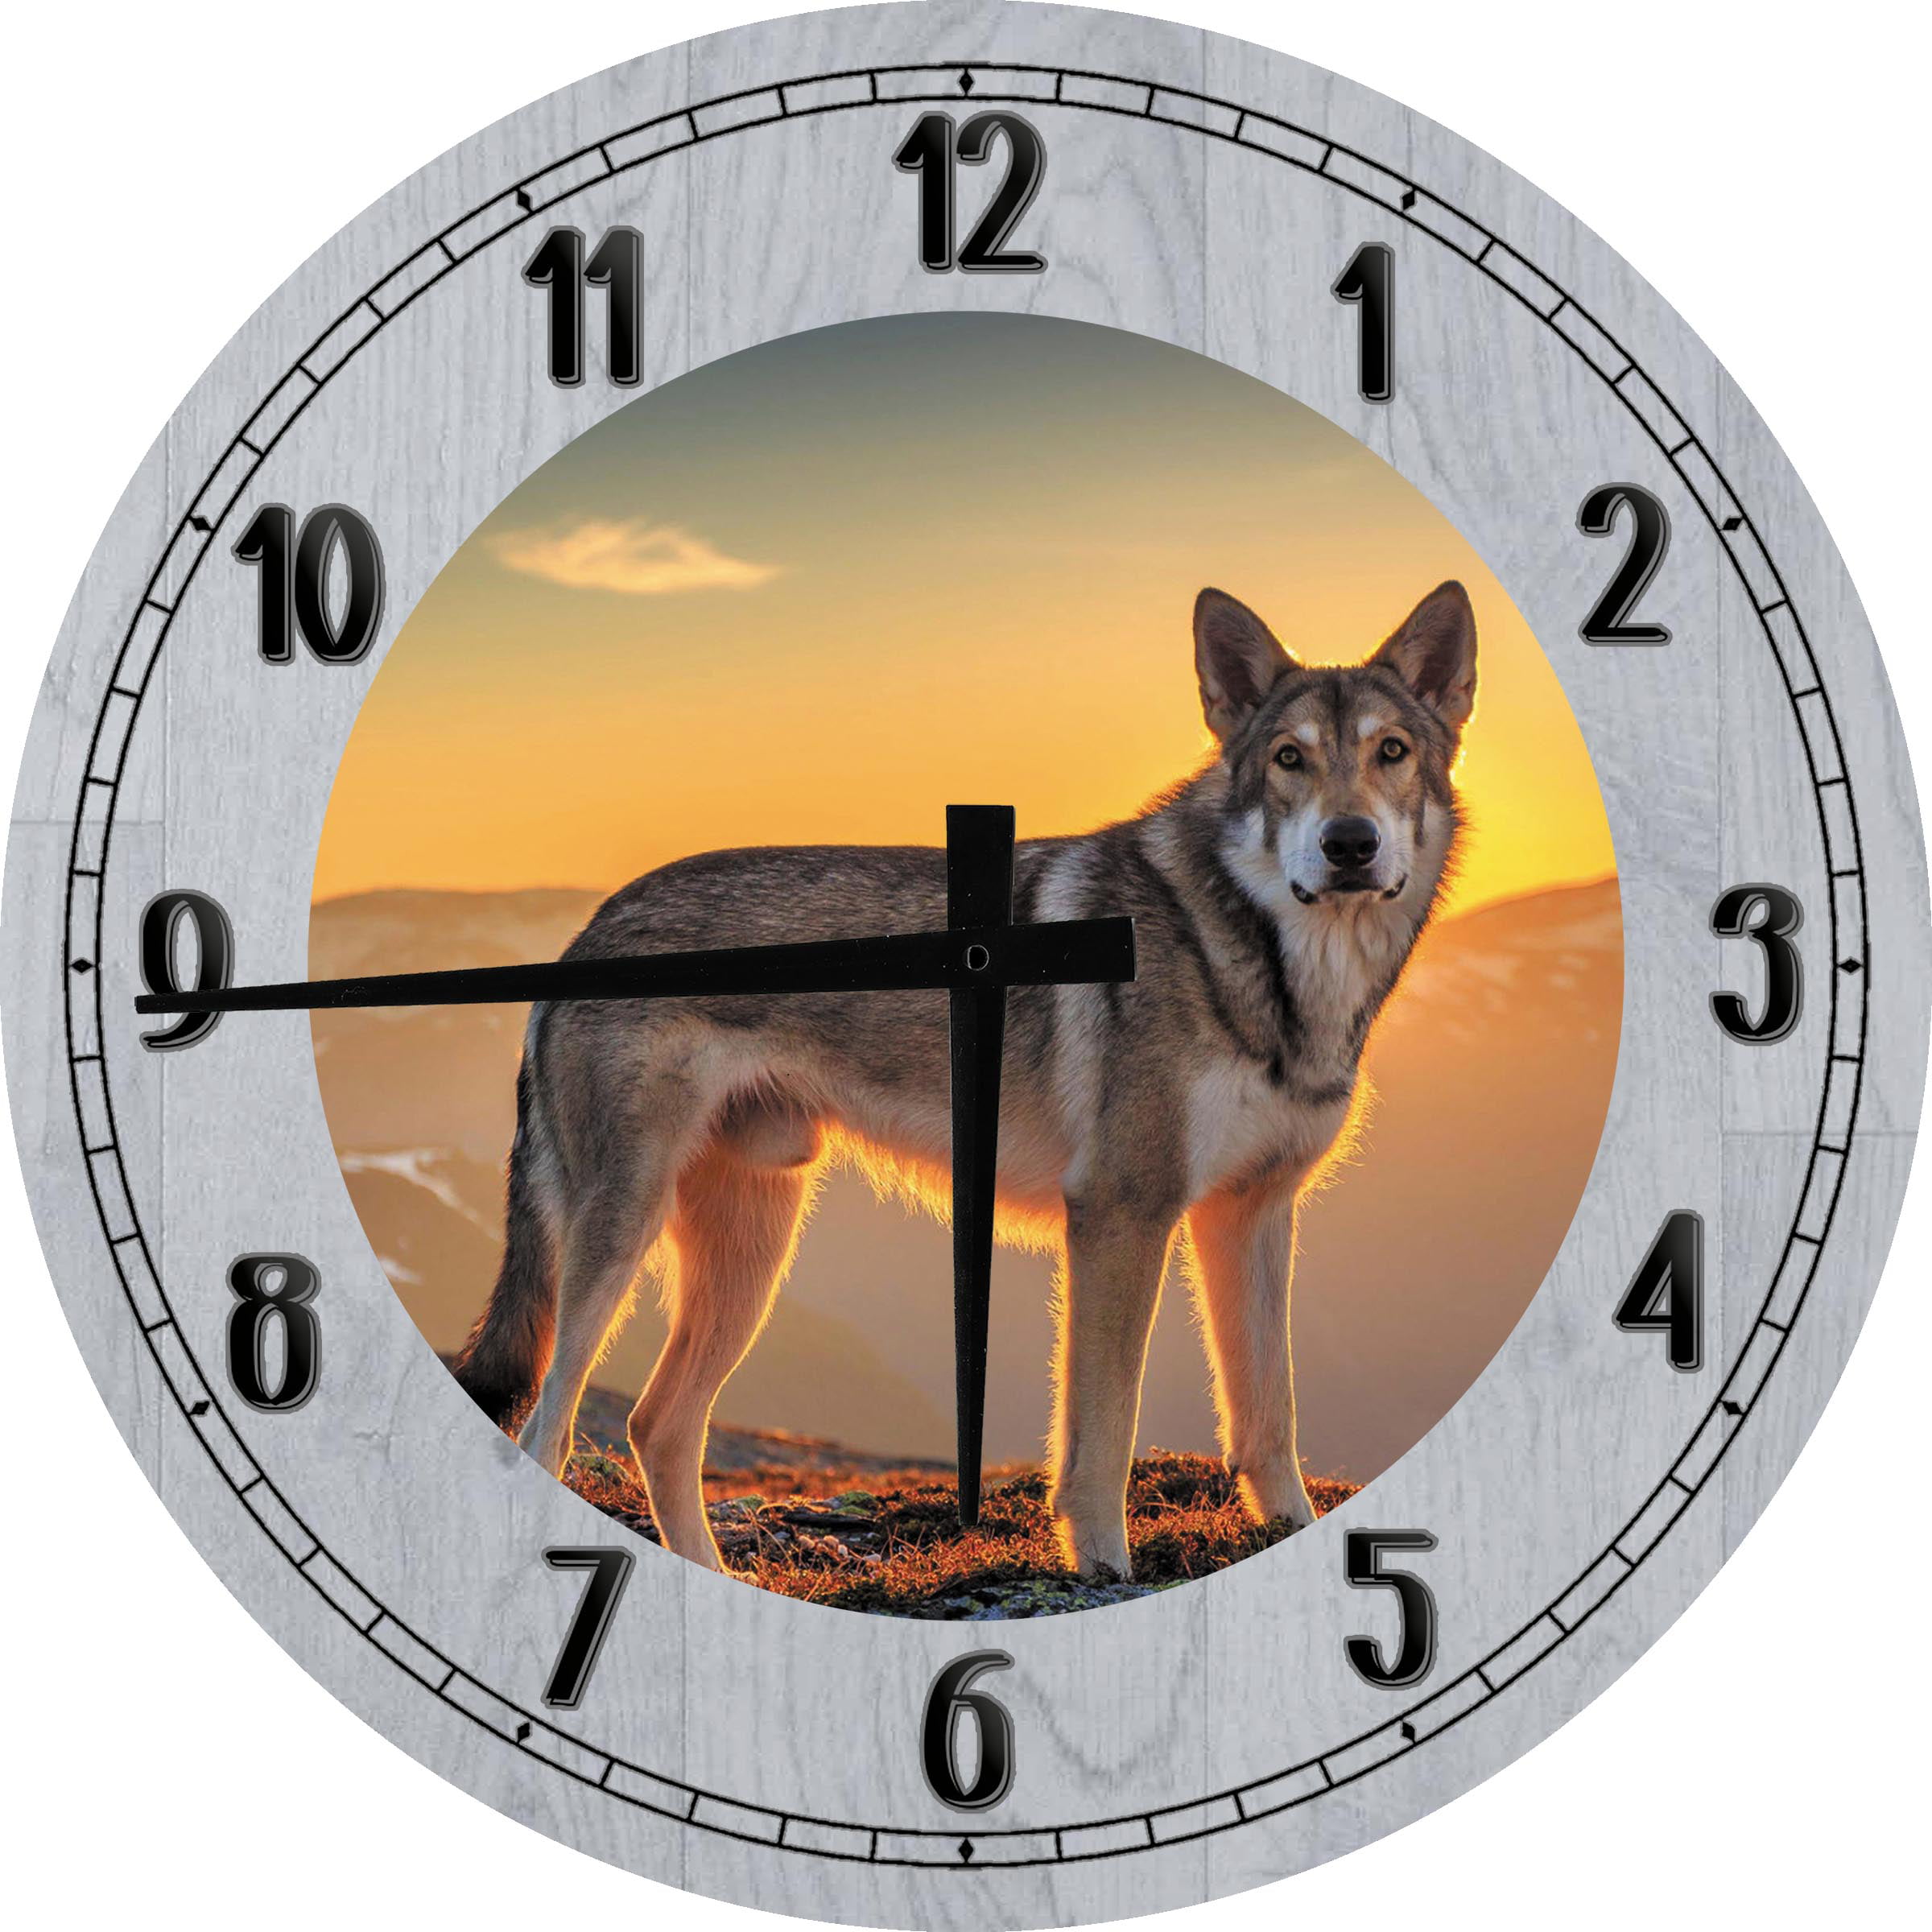 WOLF PAIR CLOCK AFFECTIONATE WOLVES GREY RUSTIC 30CM 12" WOODEN WALL CLOCK GIFT 